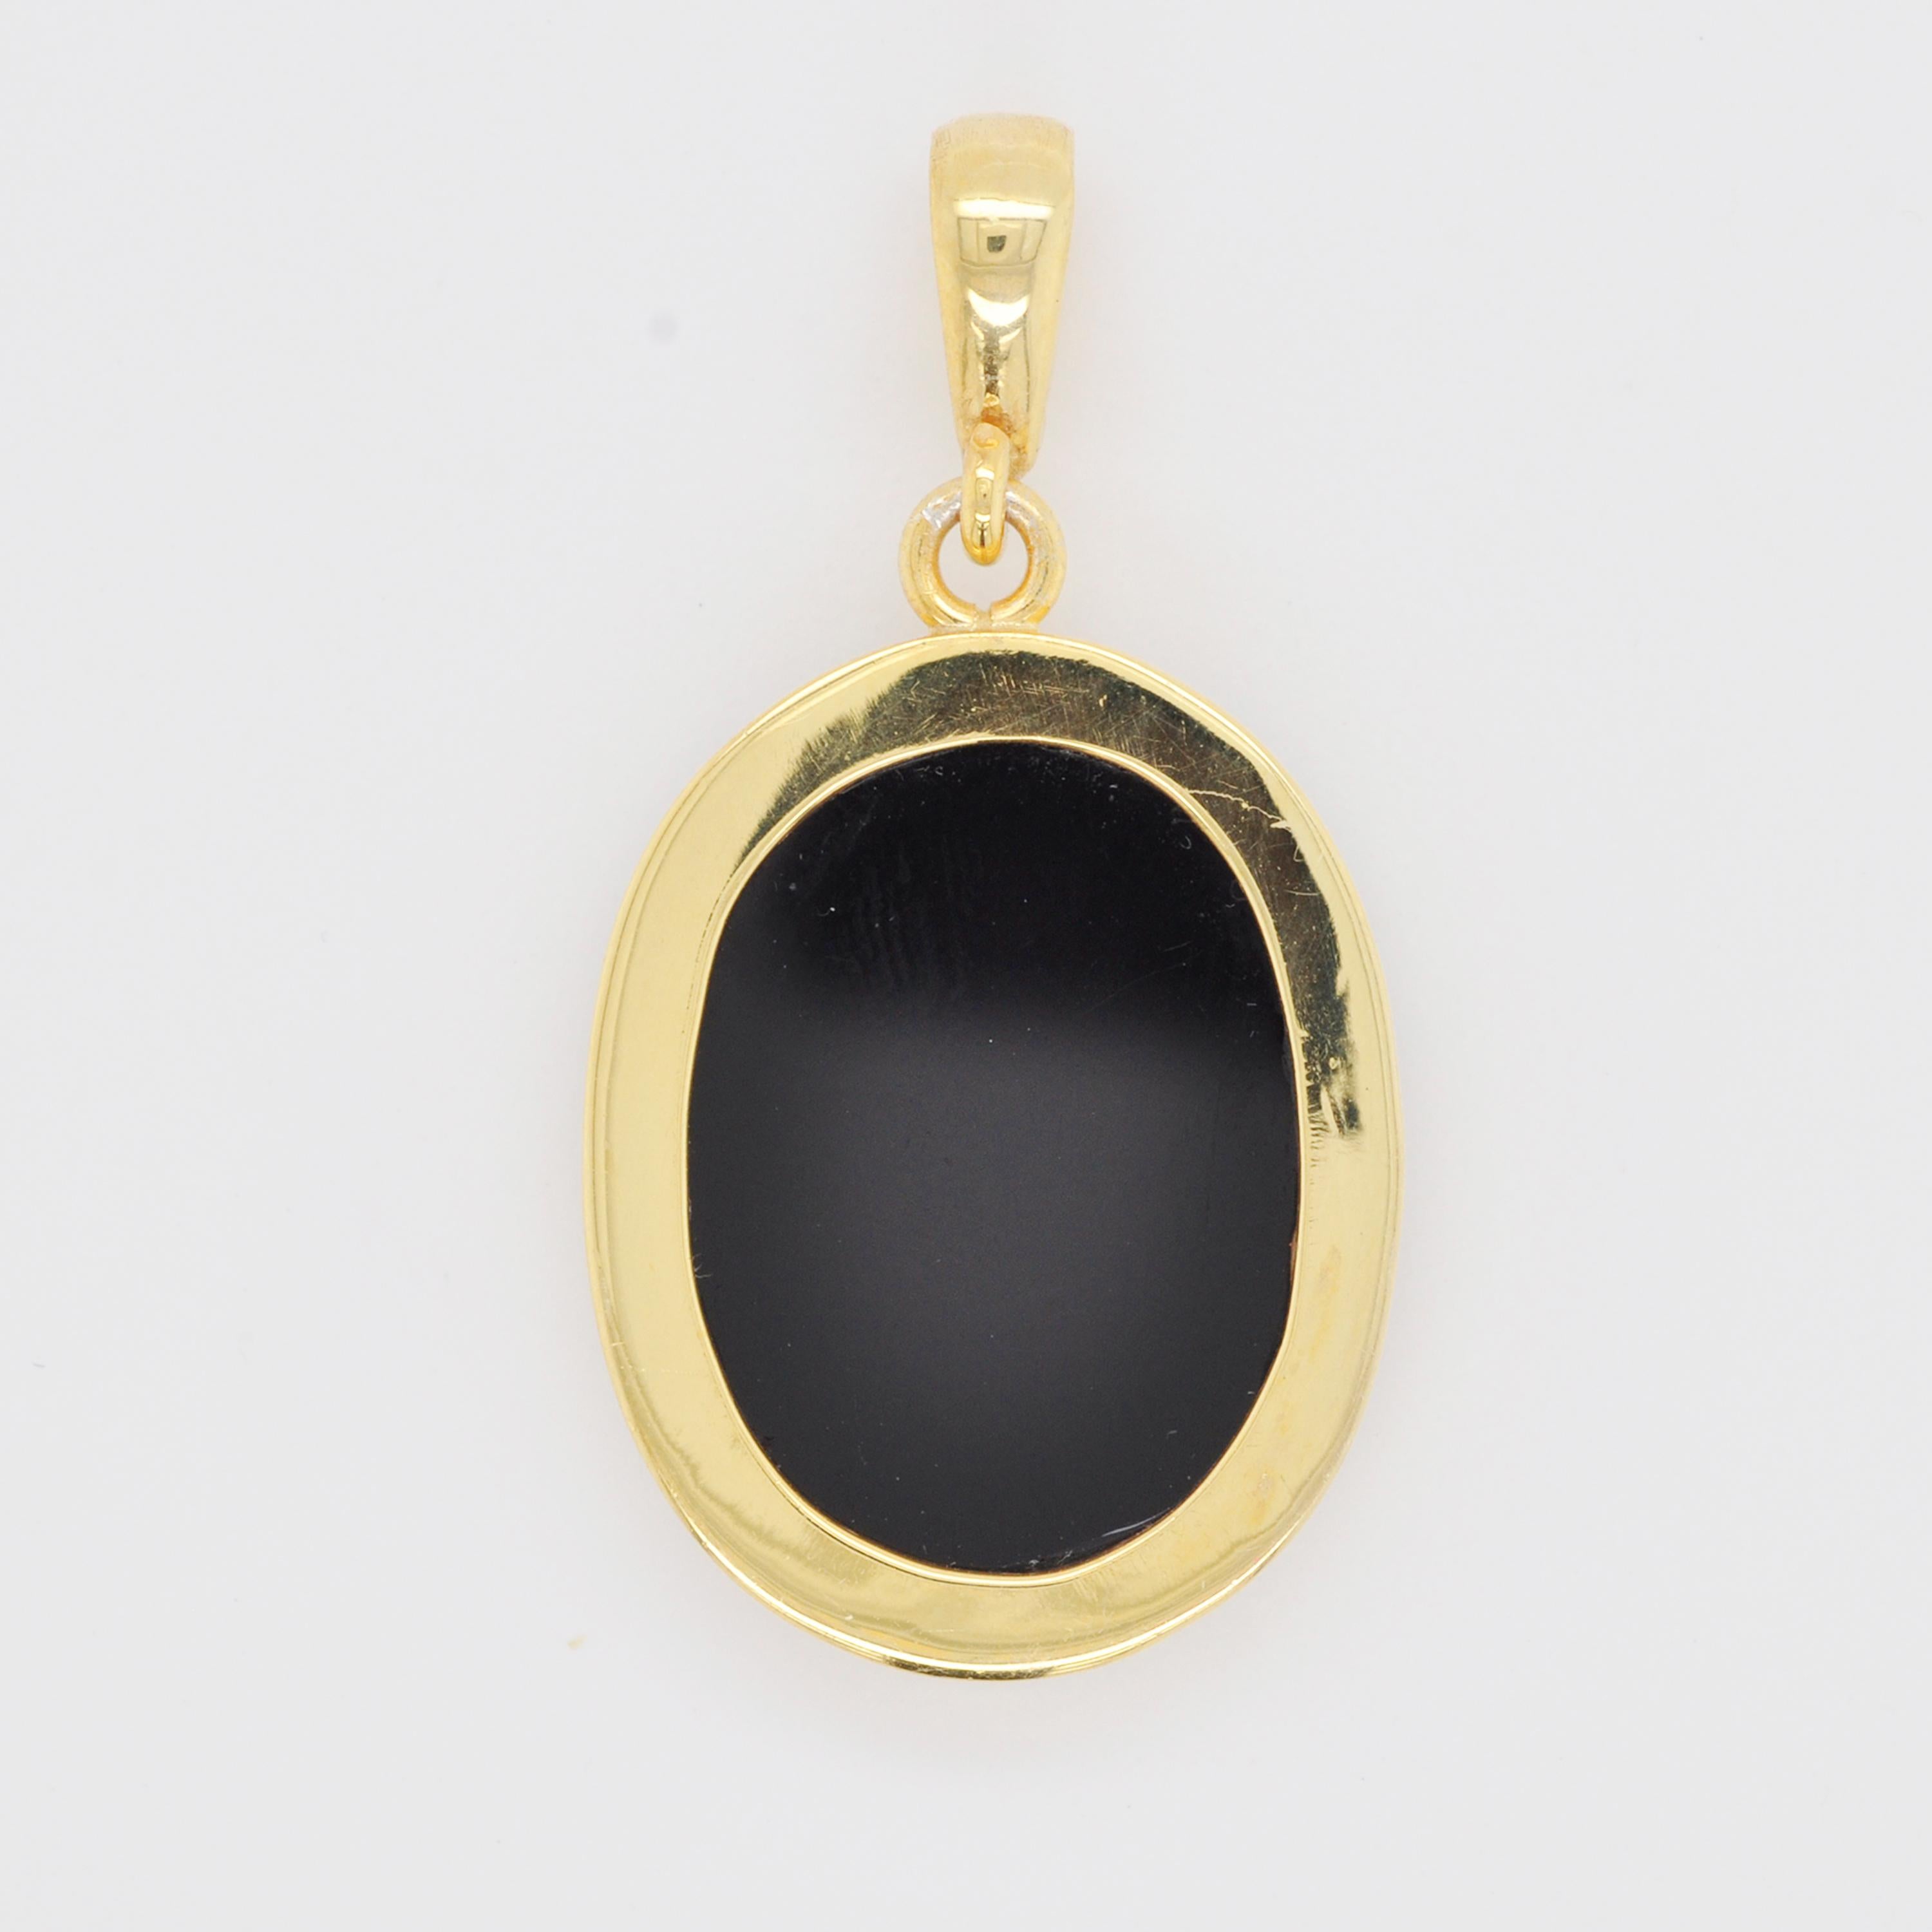 18K Gold Hand-Carved Gemini Zodiac Agate Cameo Pendant Necklace For Sale 2